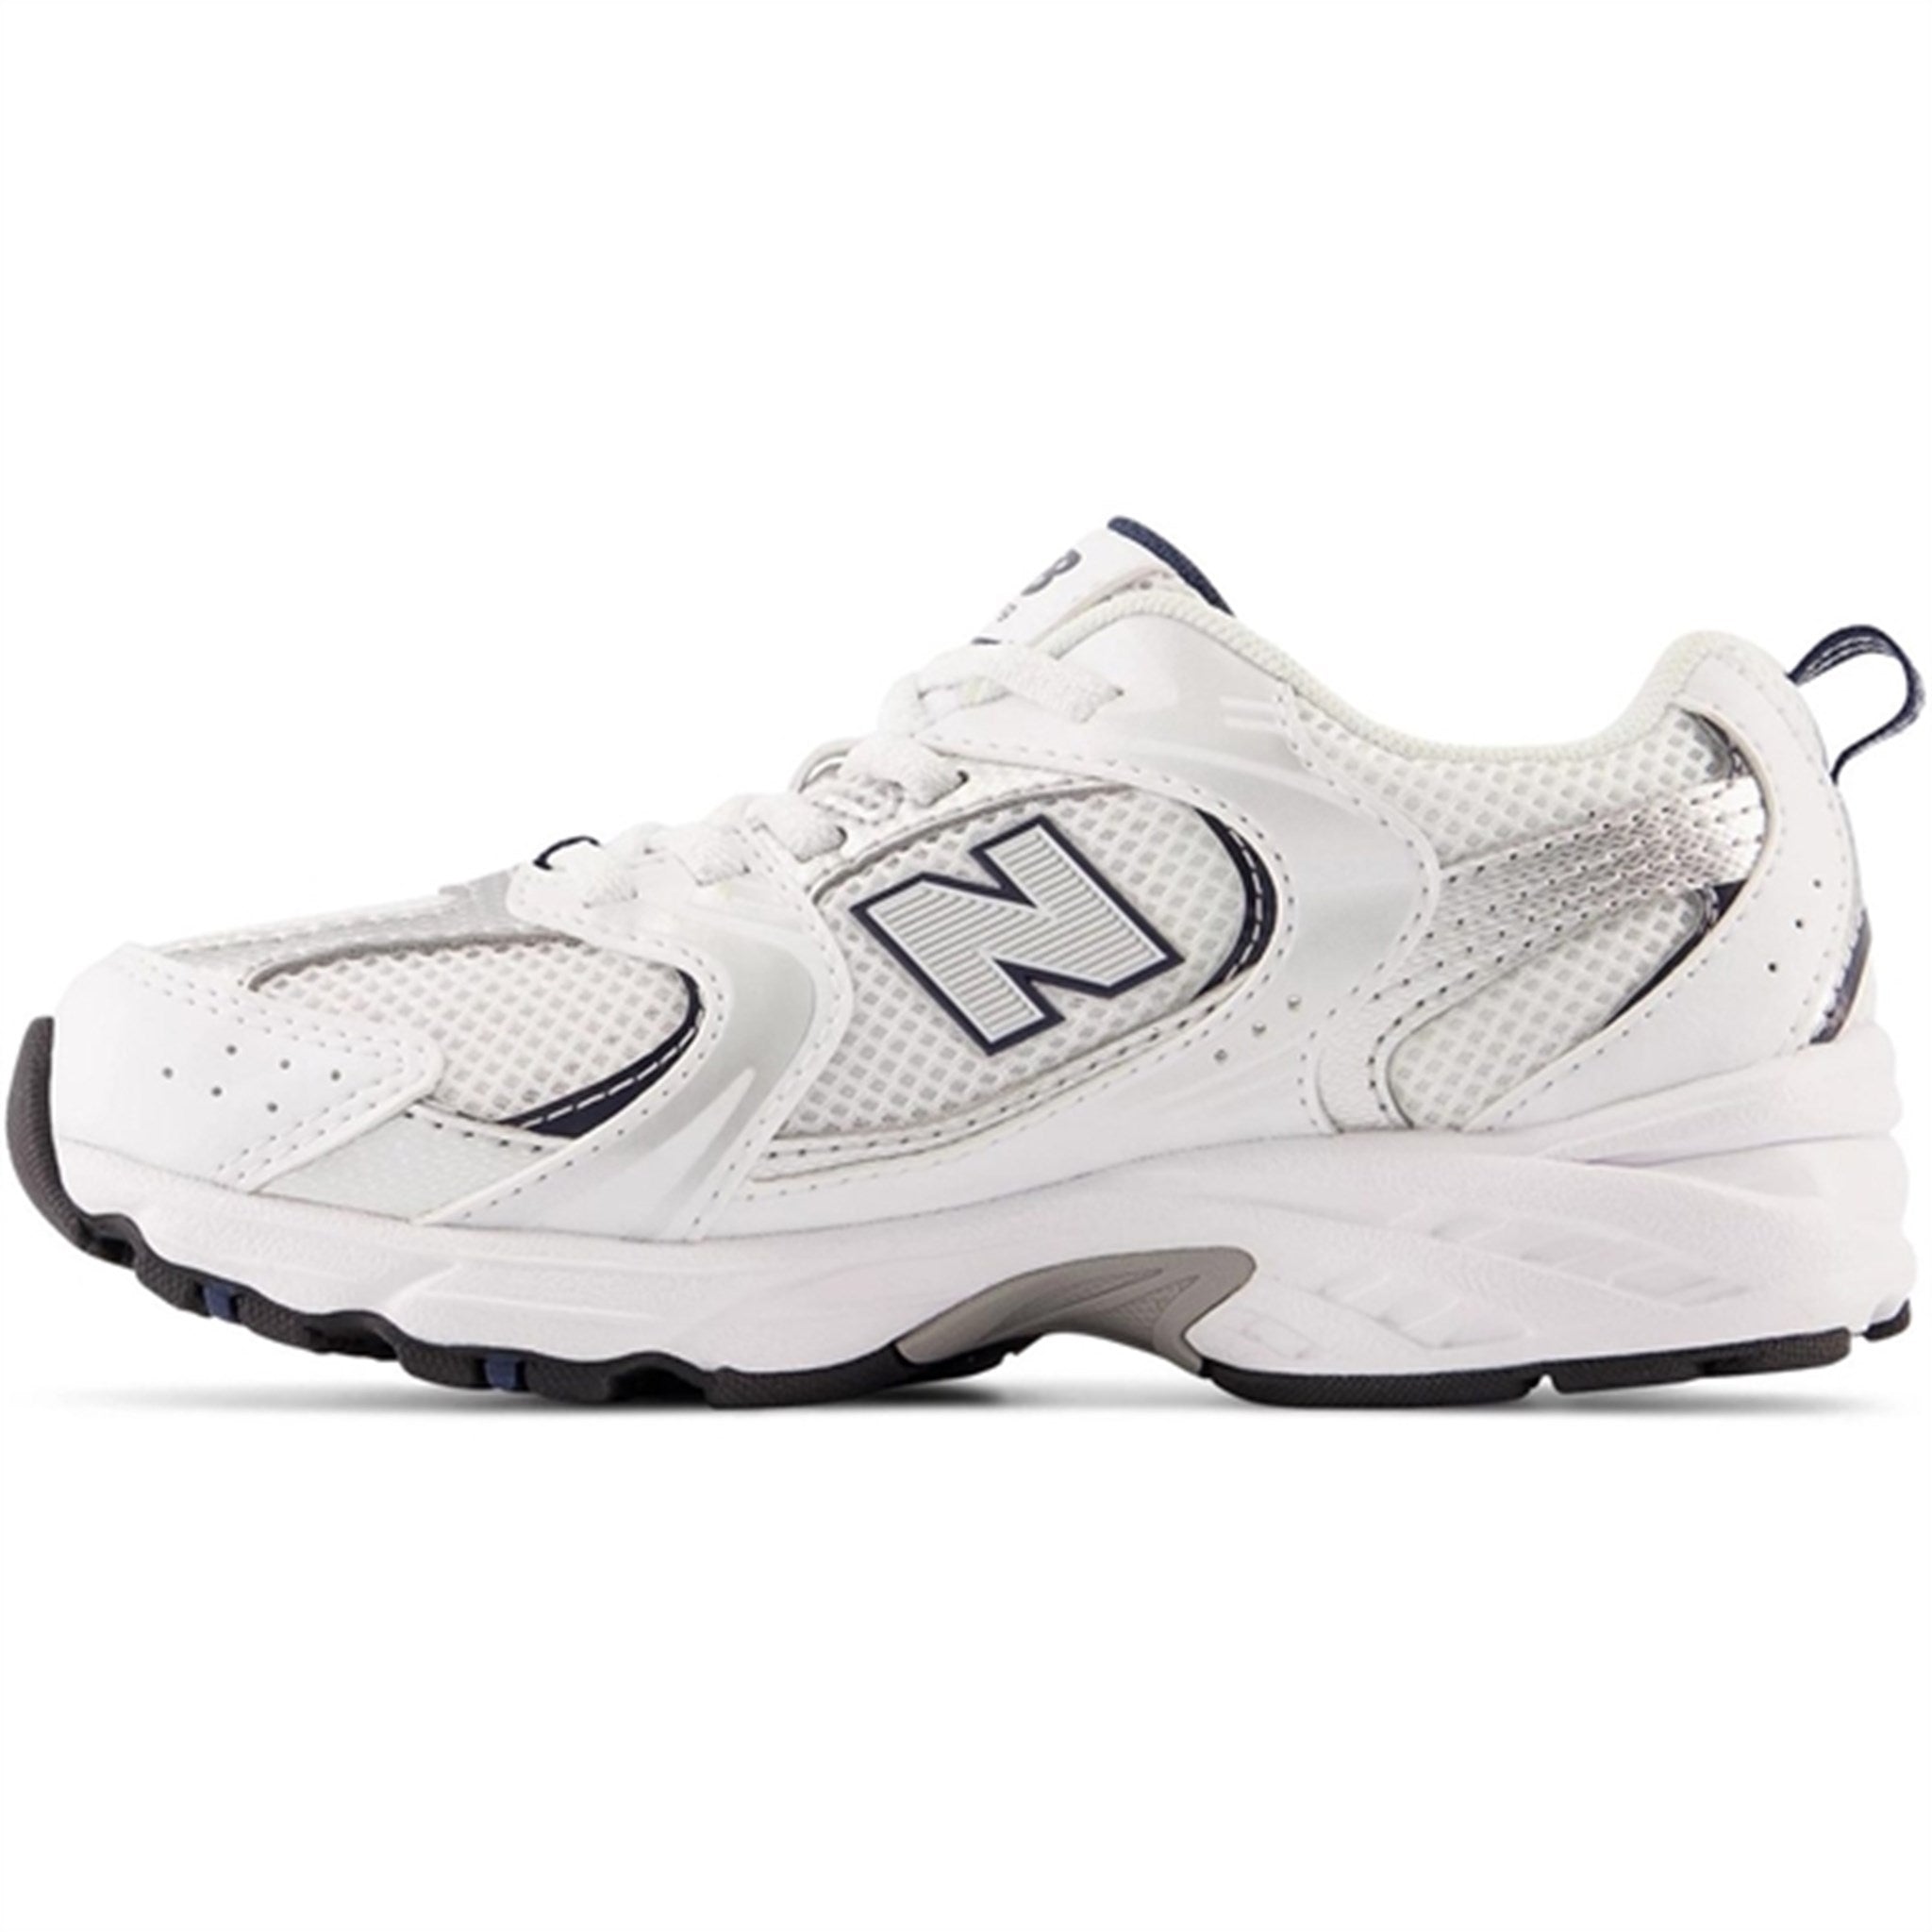 New Balance 530 Kids Bungee Lace Sneakers White 3